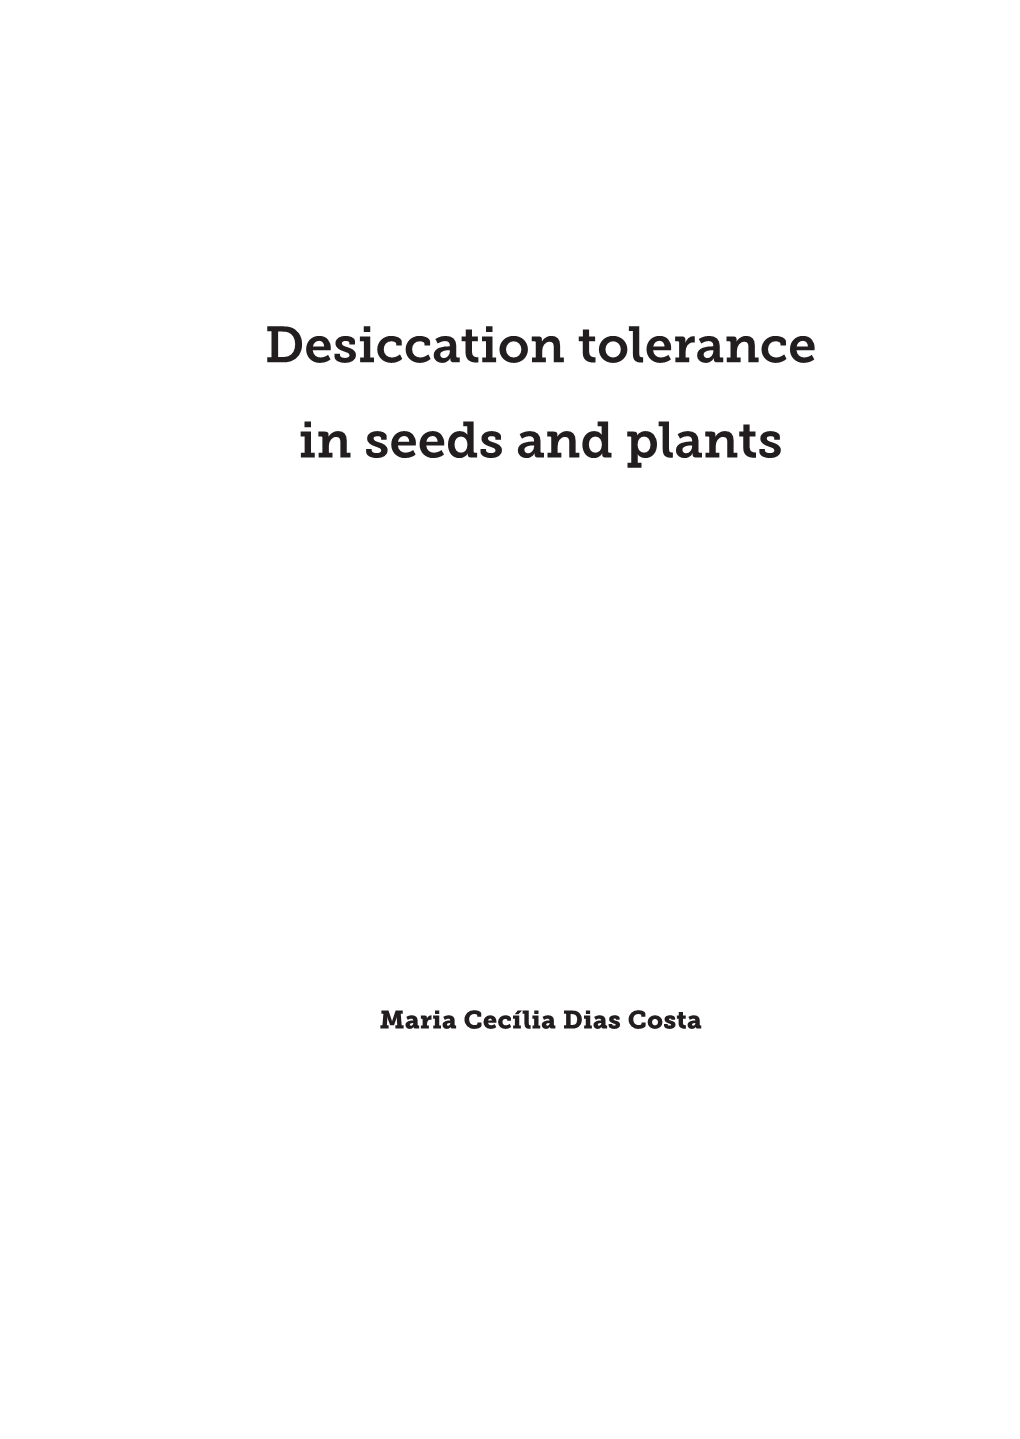 Desiccation Tolerance in Seeds and Plants